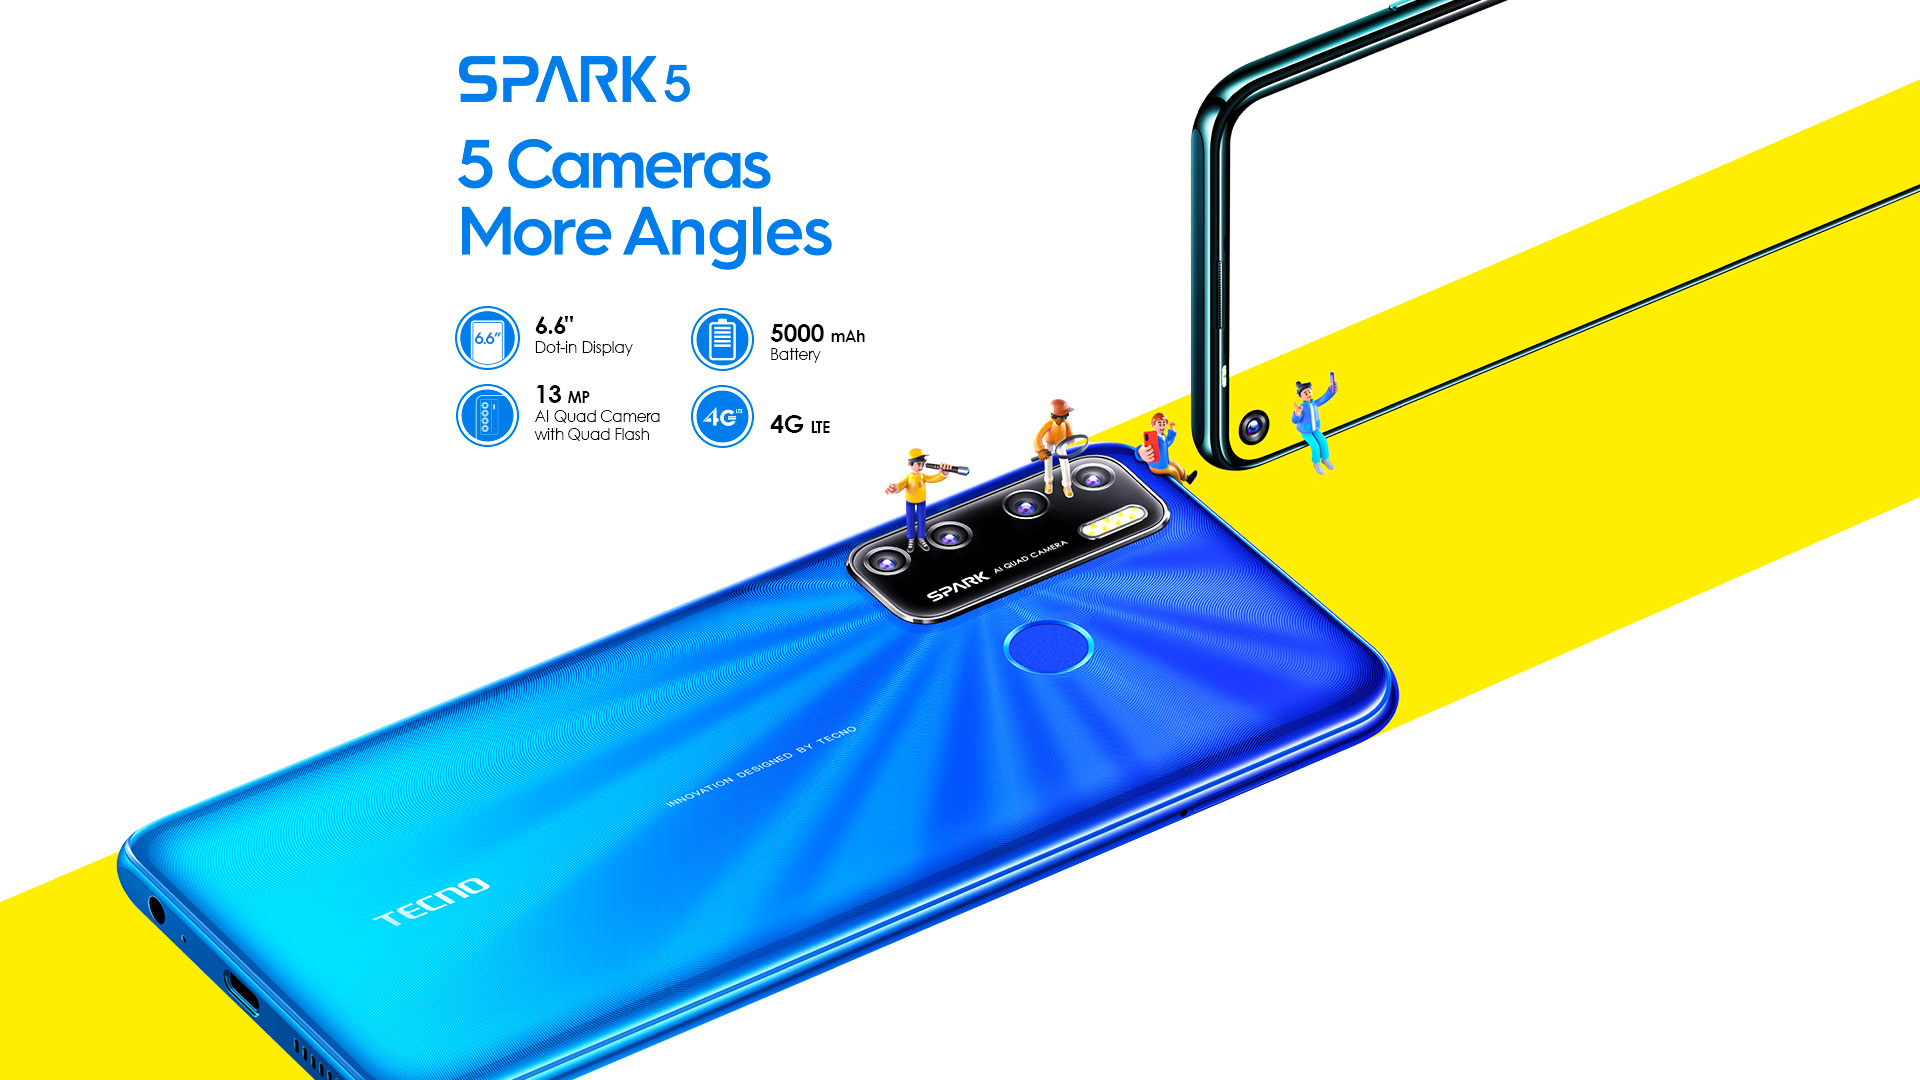 Tecno Spark 5 revealed with 6.6" screen, Android 10